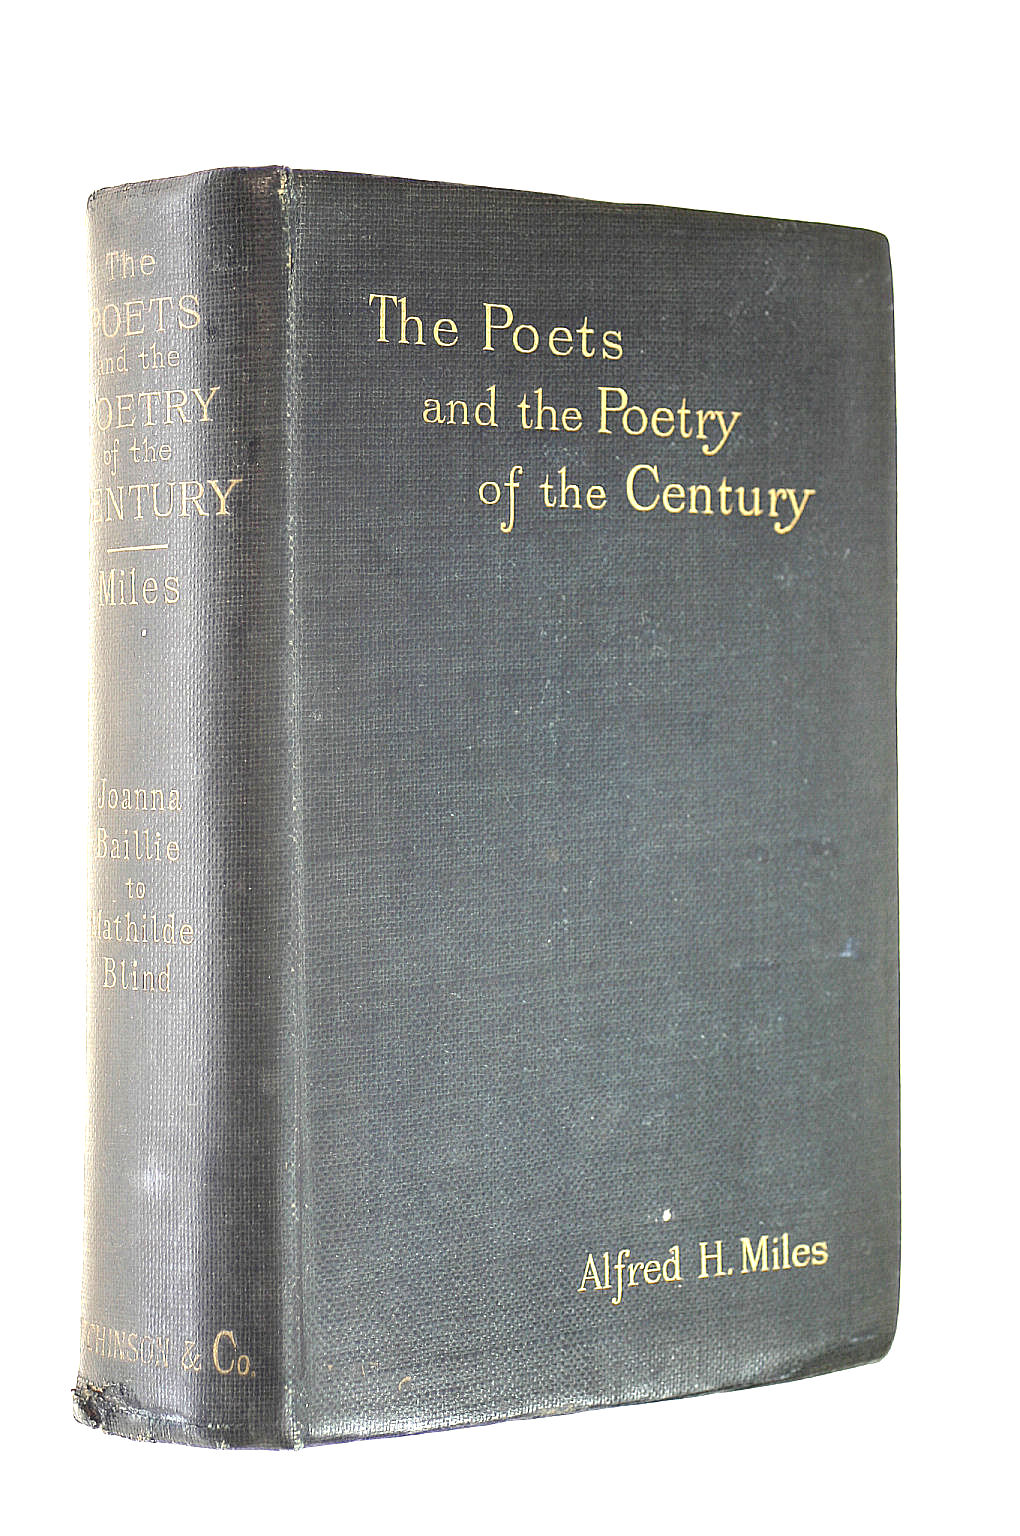 ALFRED H. MILES 9ED) - The Poets and the Poetry of the Century, Joanna Baillie to Mathilde Blind